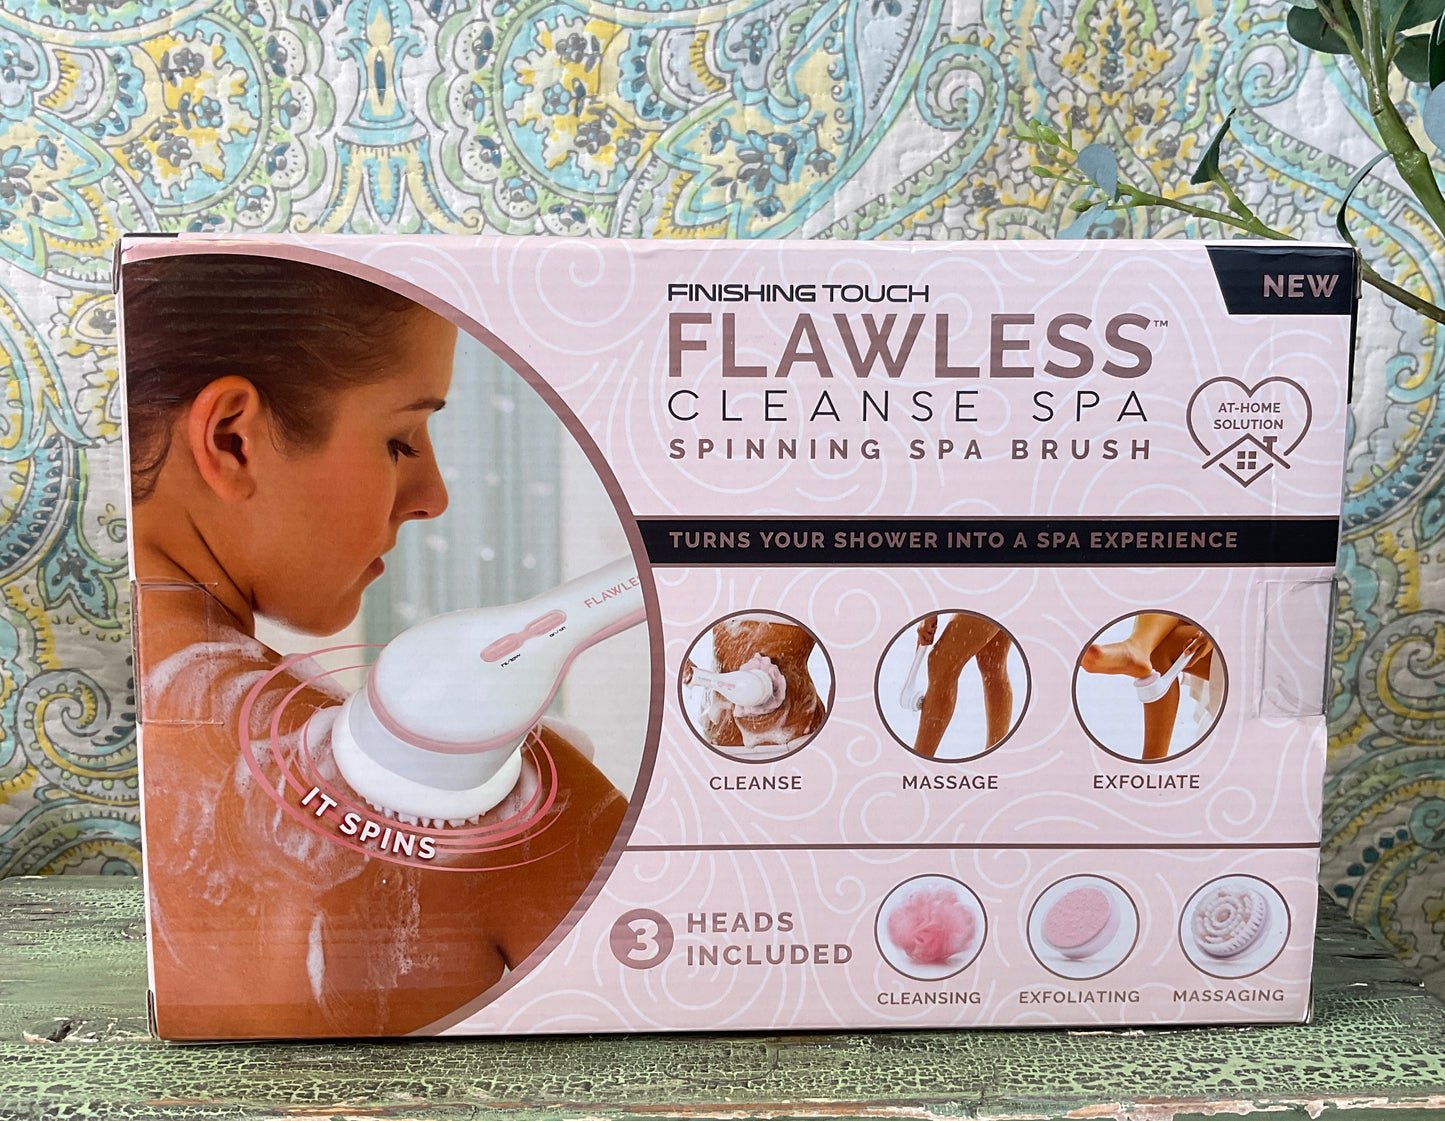 NEW Finishing Touch Flawless Cleanse Spa Spinning Spa Brush